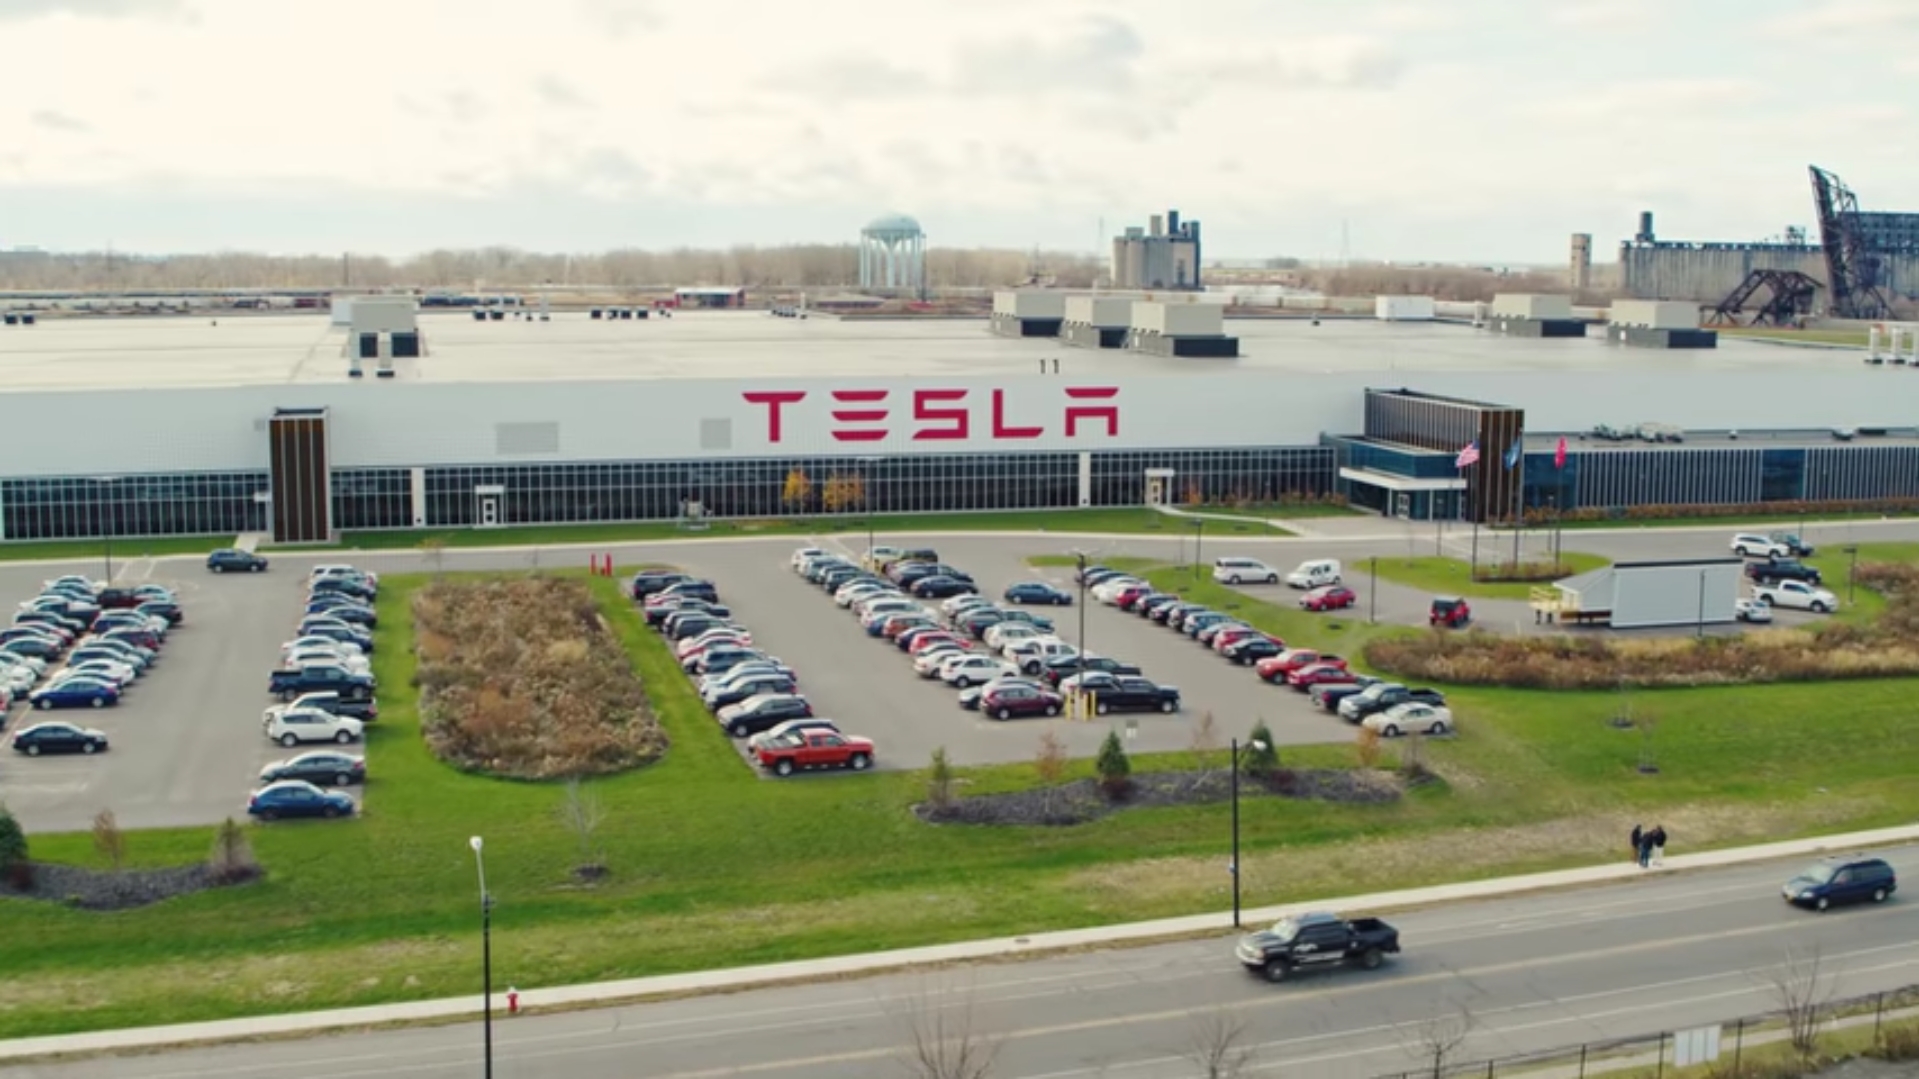 Tesla Cleared of Claim That it Fired Employees For Unionizing